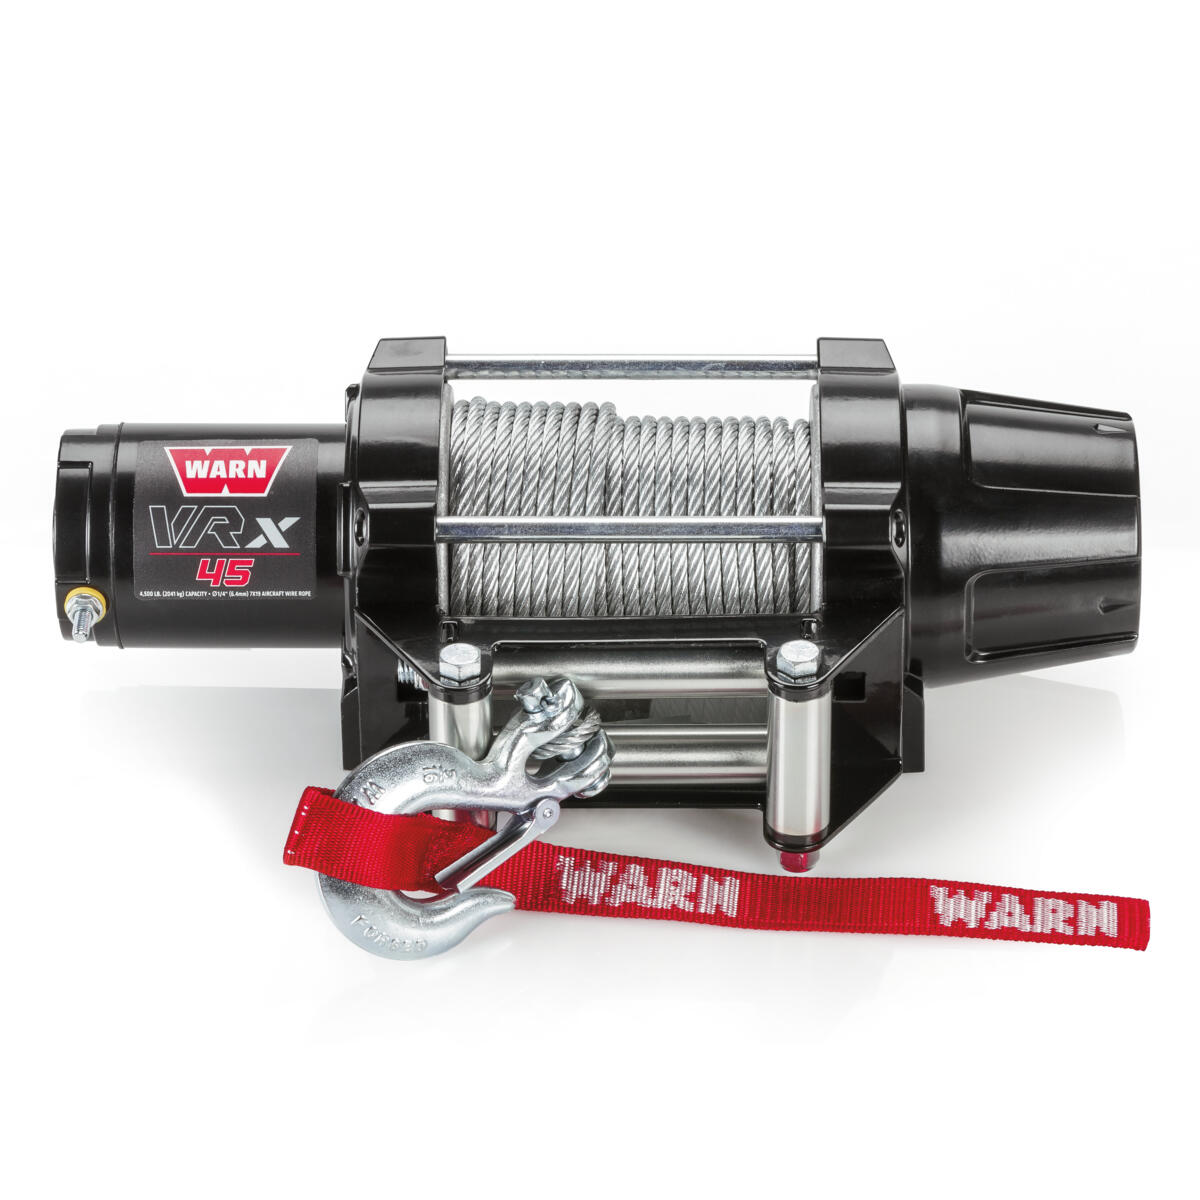 With its all-metal construction, the WARN® VRX Winch with 15.,2 metres of wire rope includes the new clutch developed from the WARN® 4WD hub lock design.